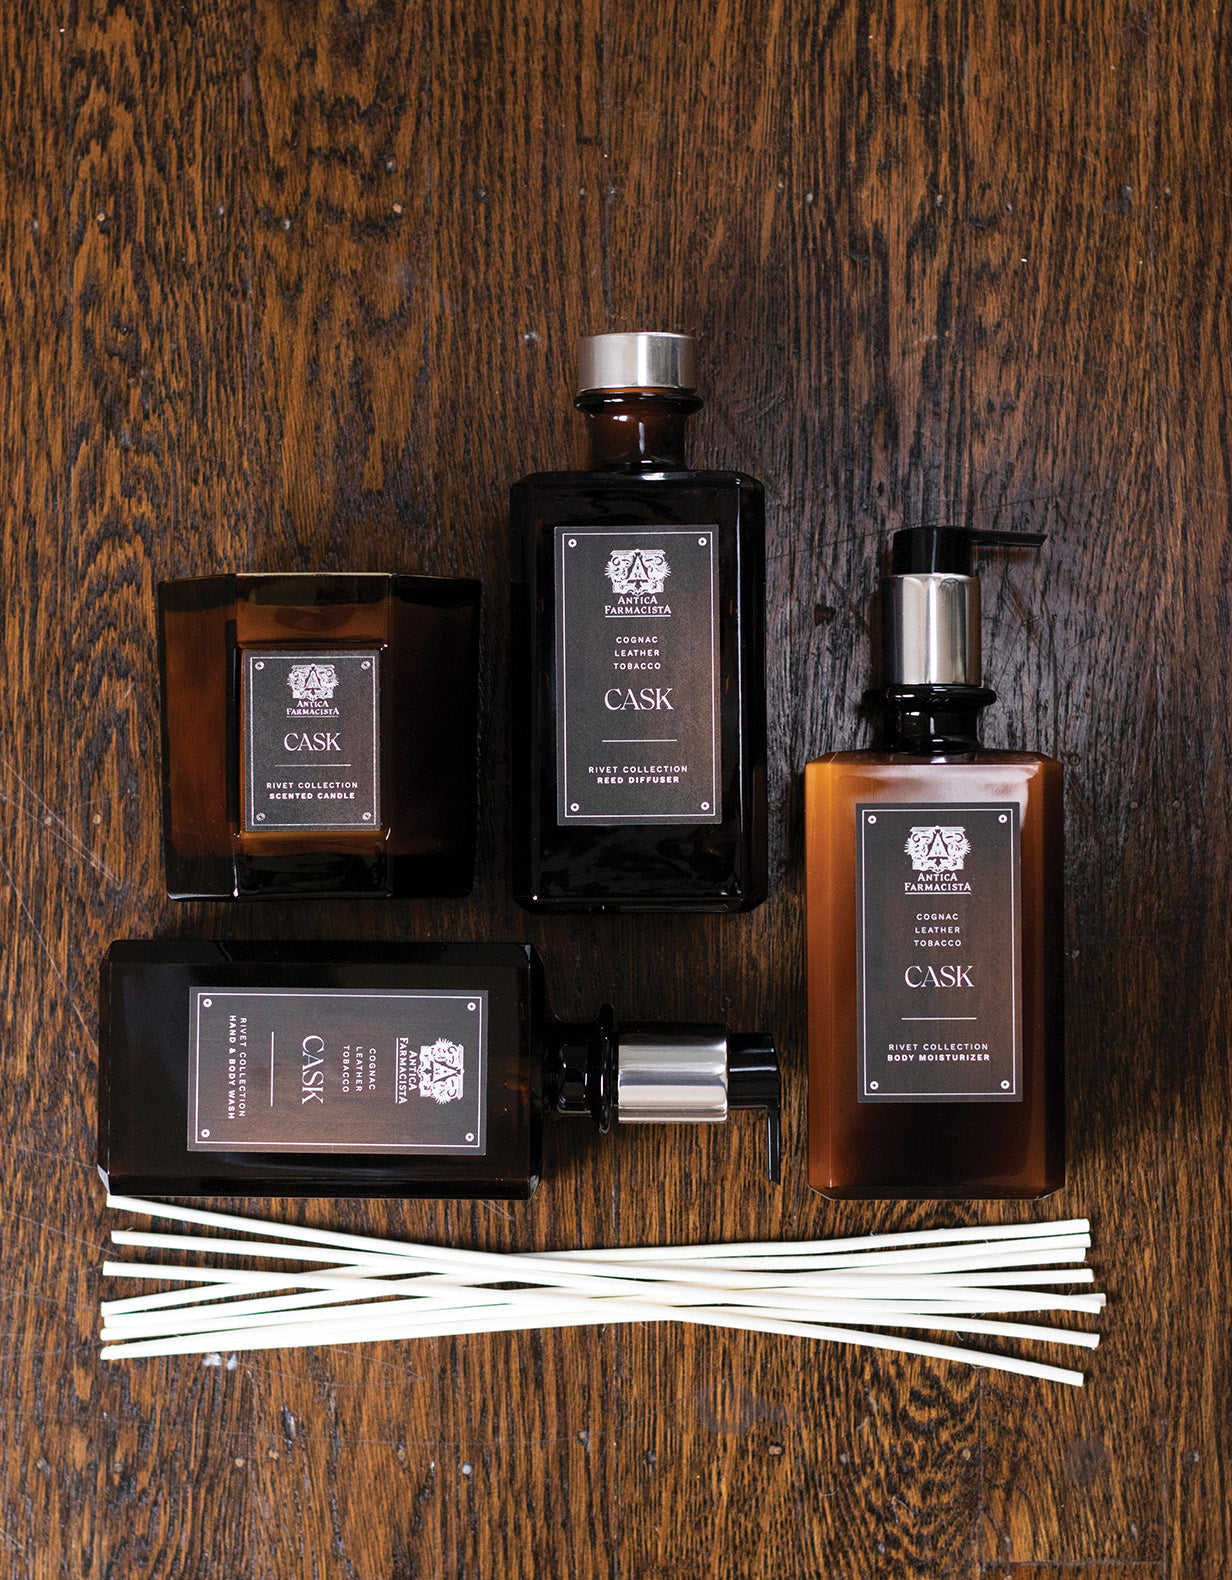 320ml Cask Reed Diffuser